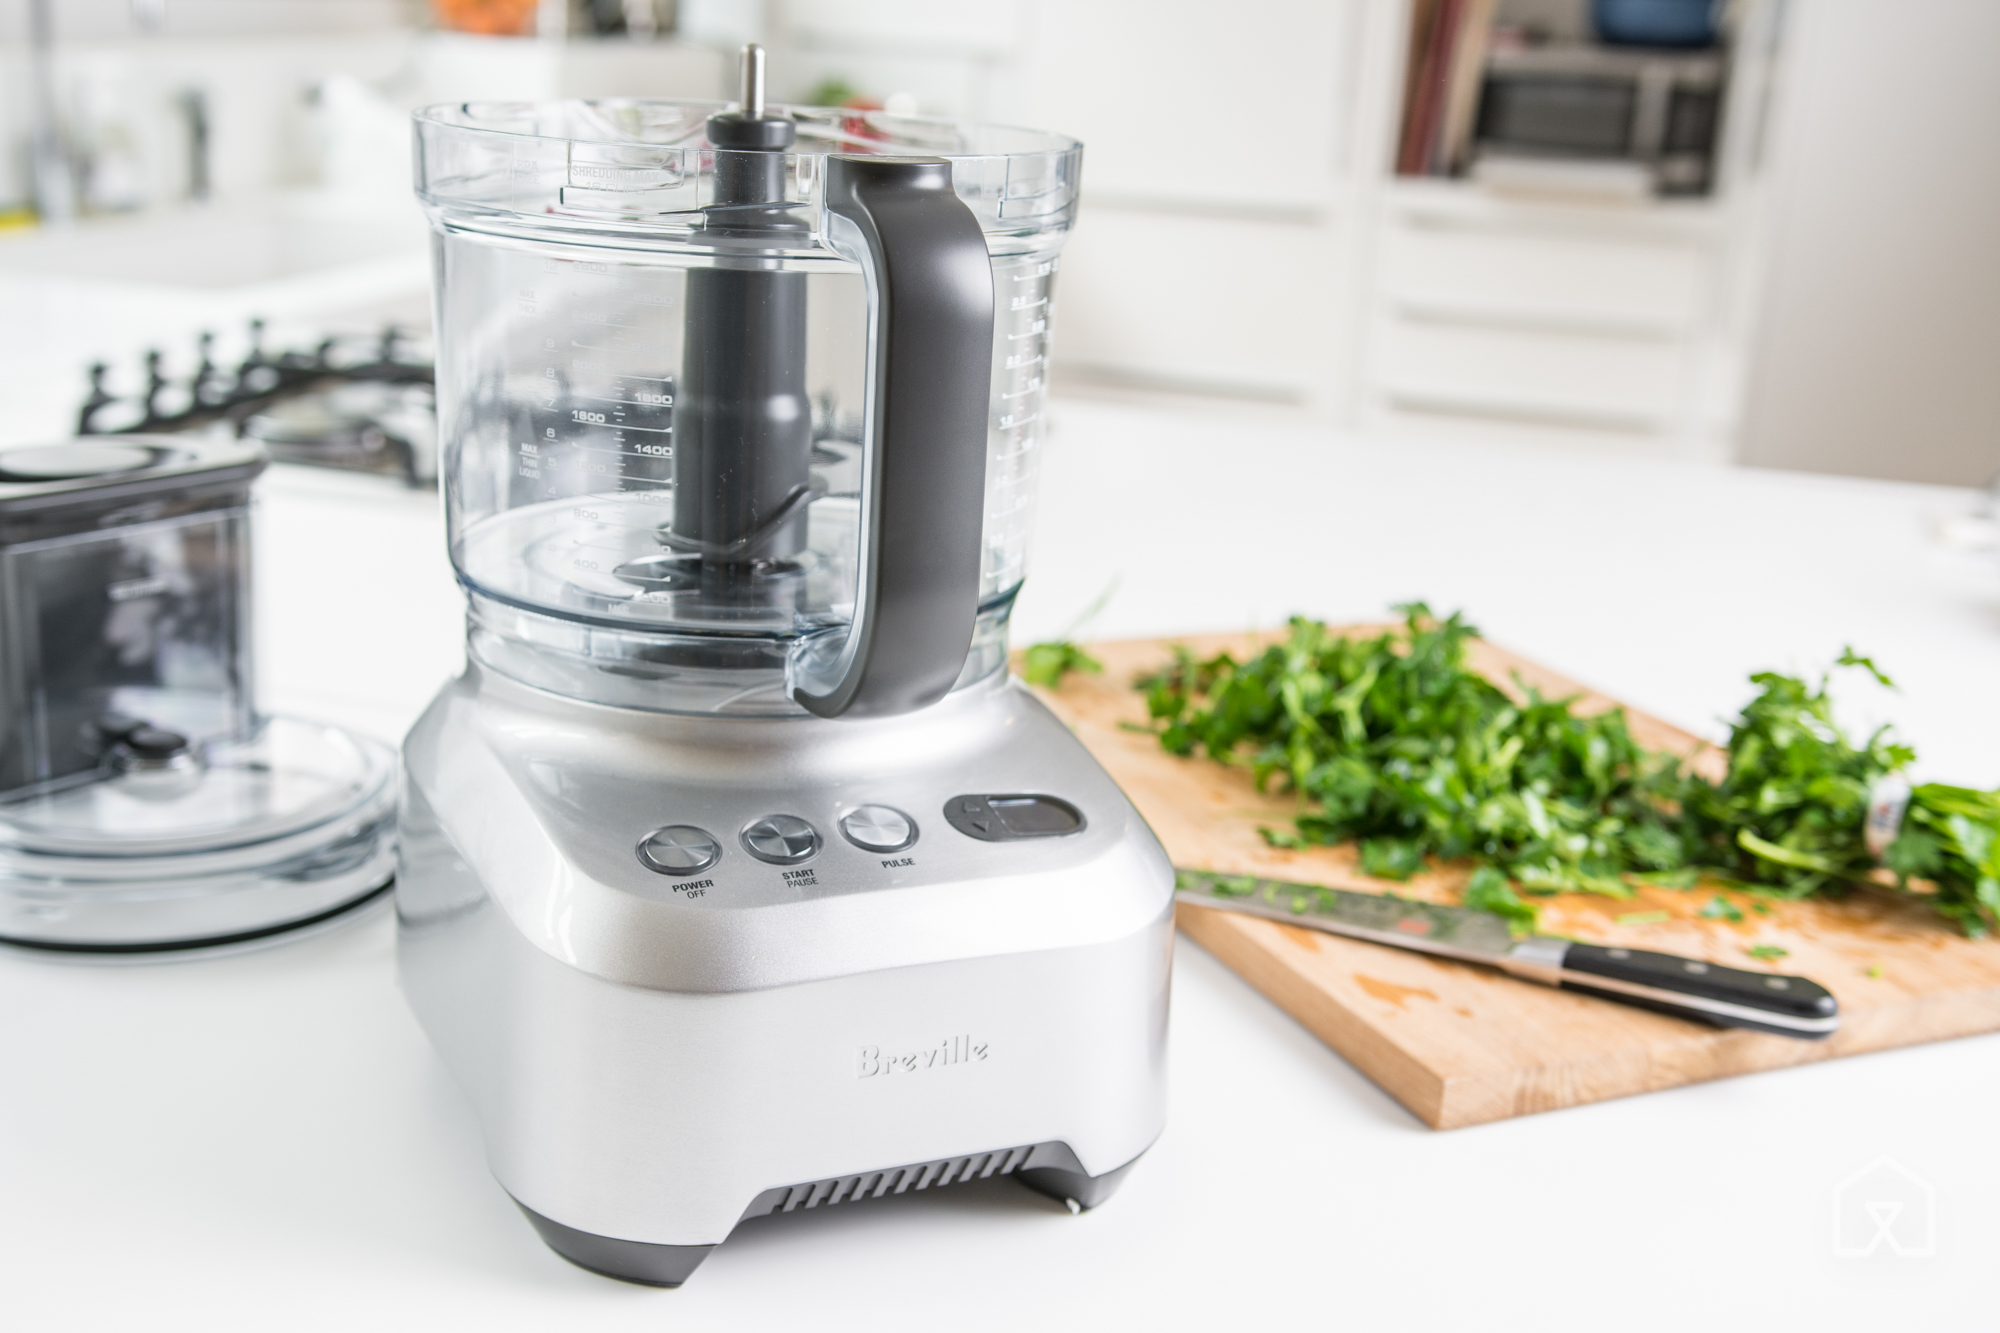 The best food processor